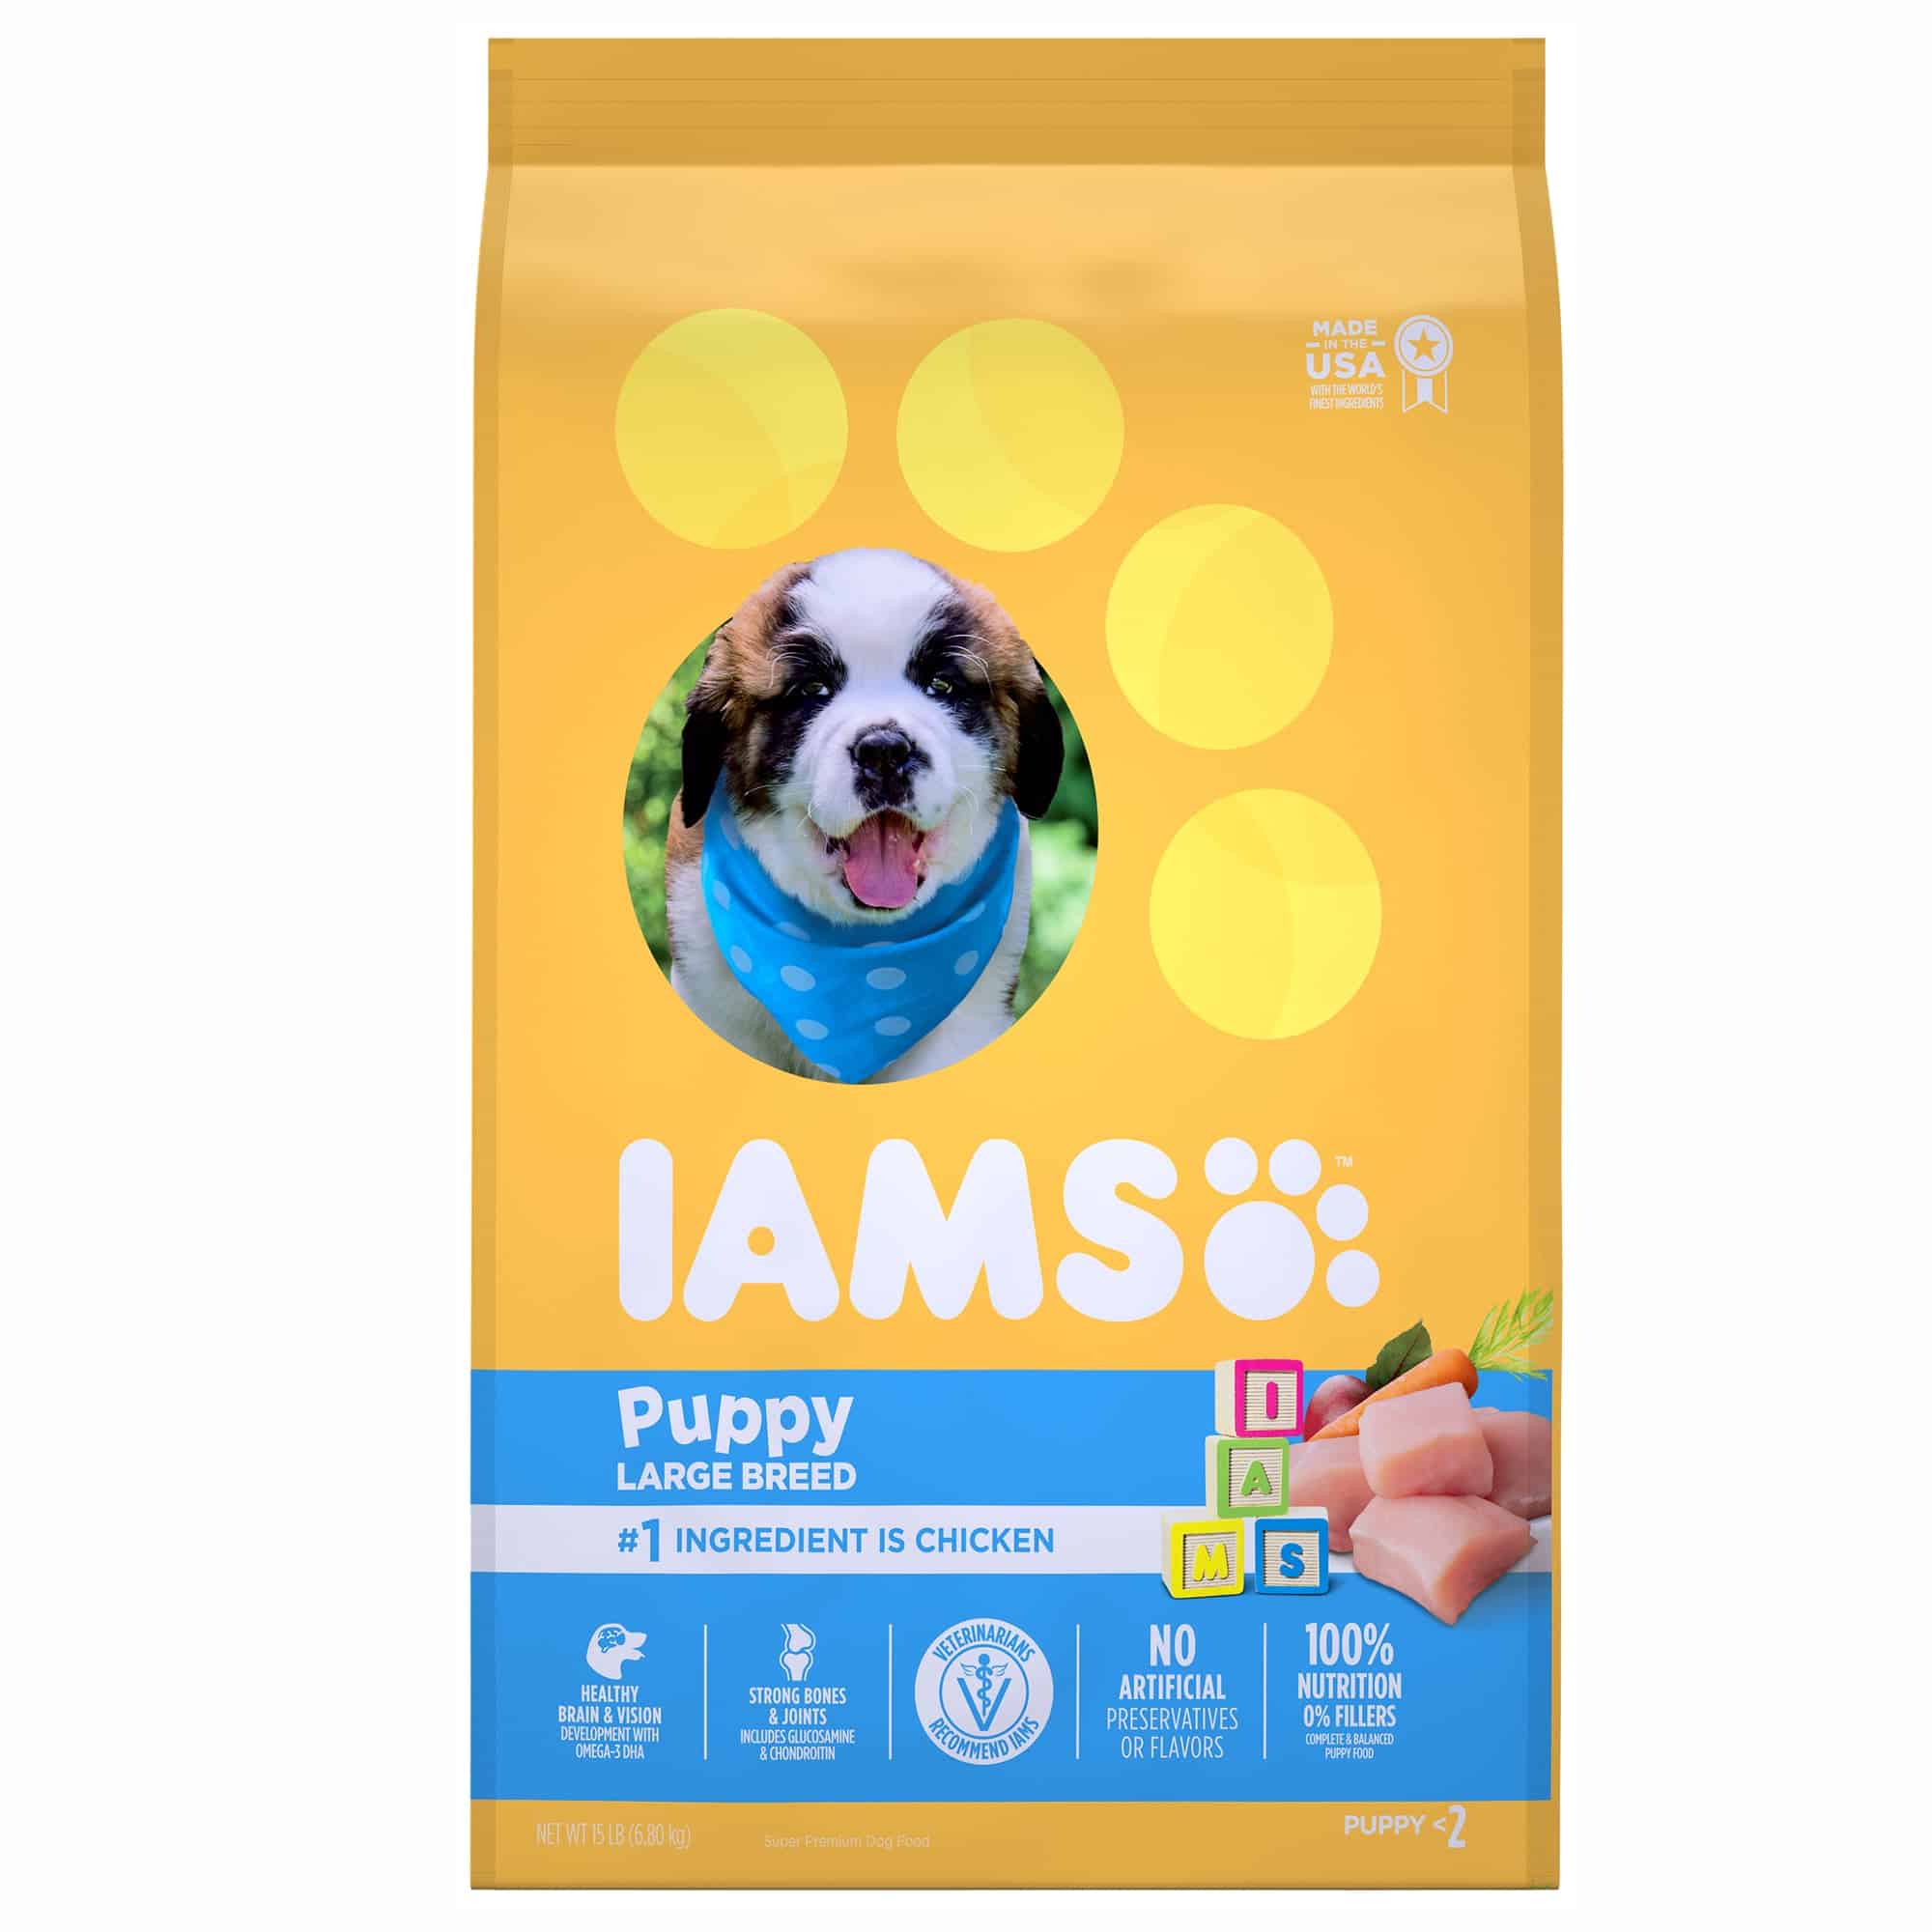 iams-puppy-large-breed-price-comparison-tool-thegoodypet